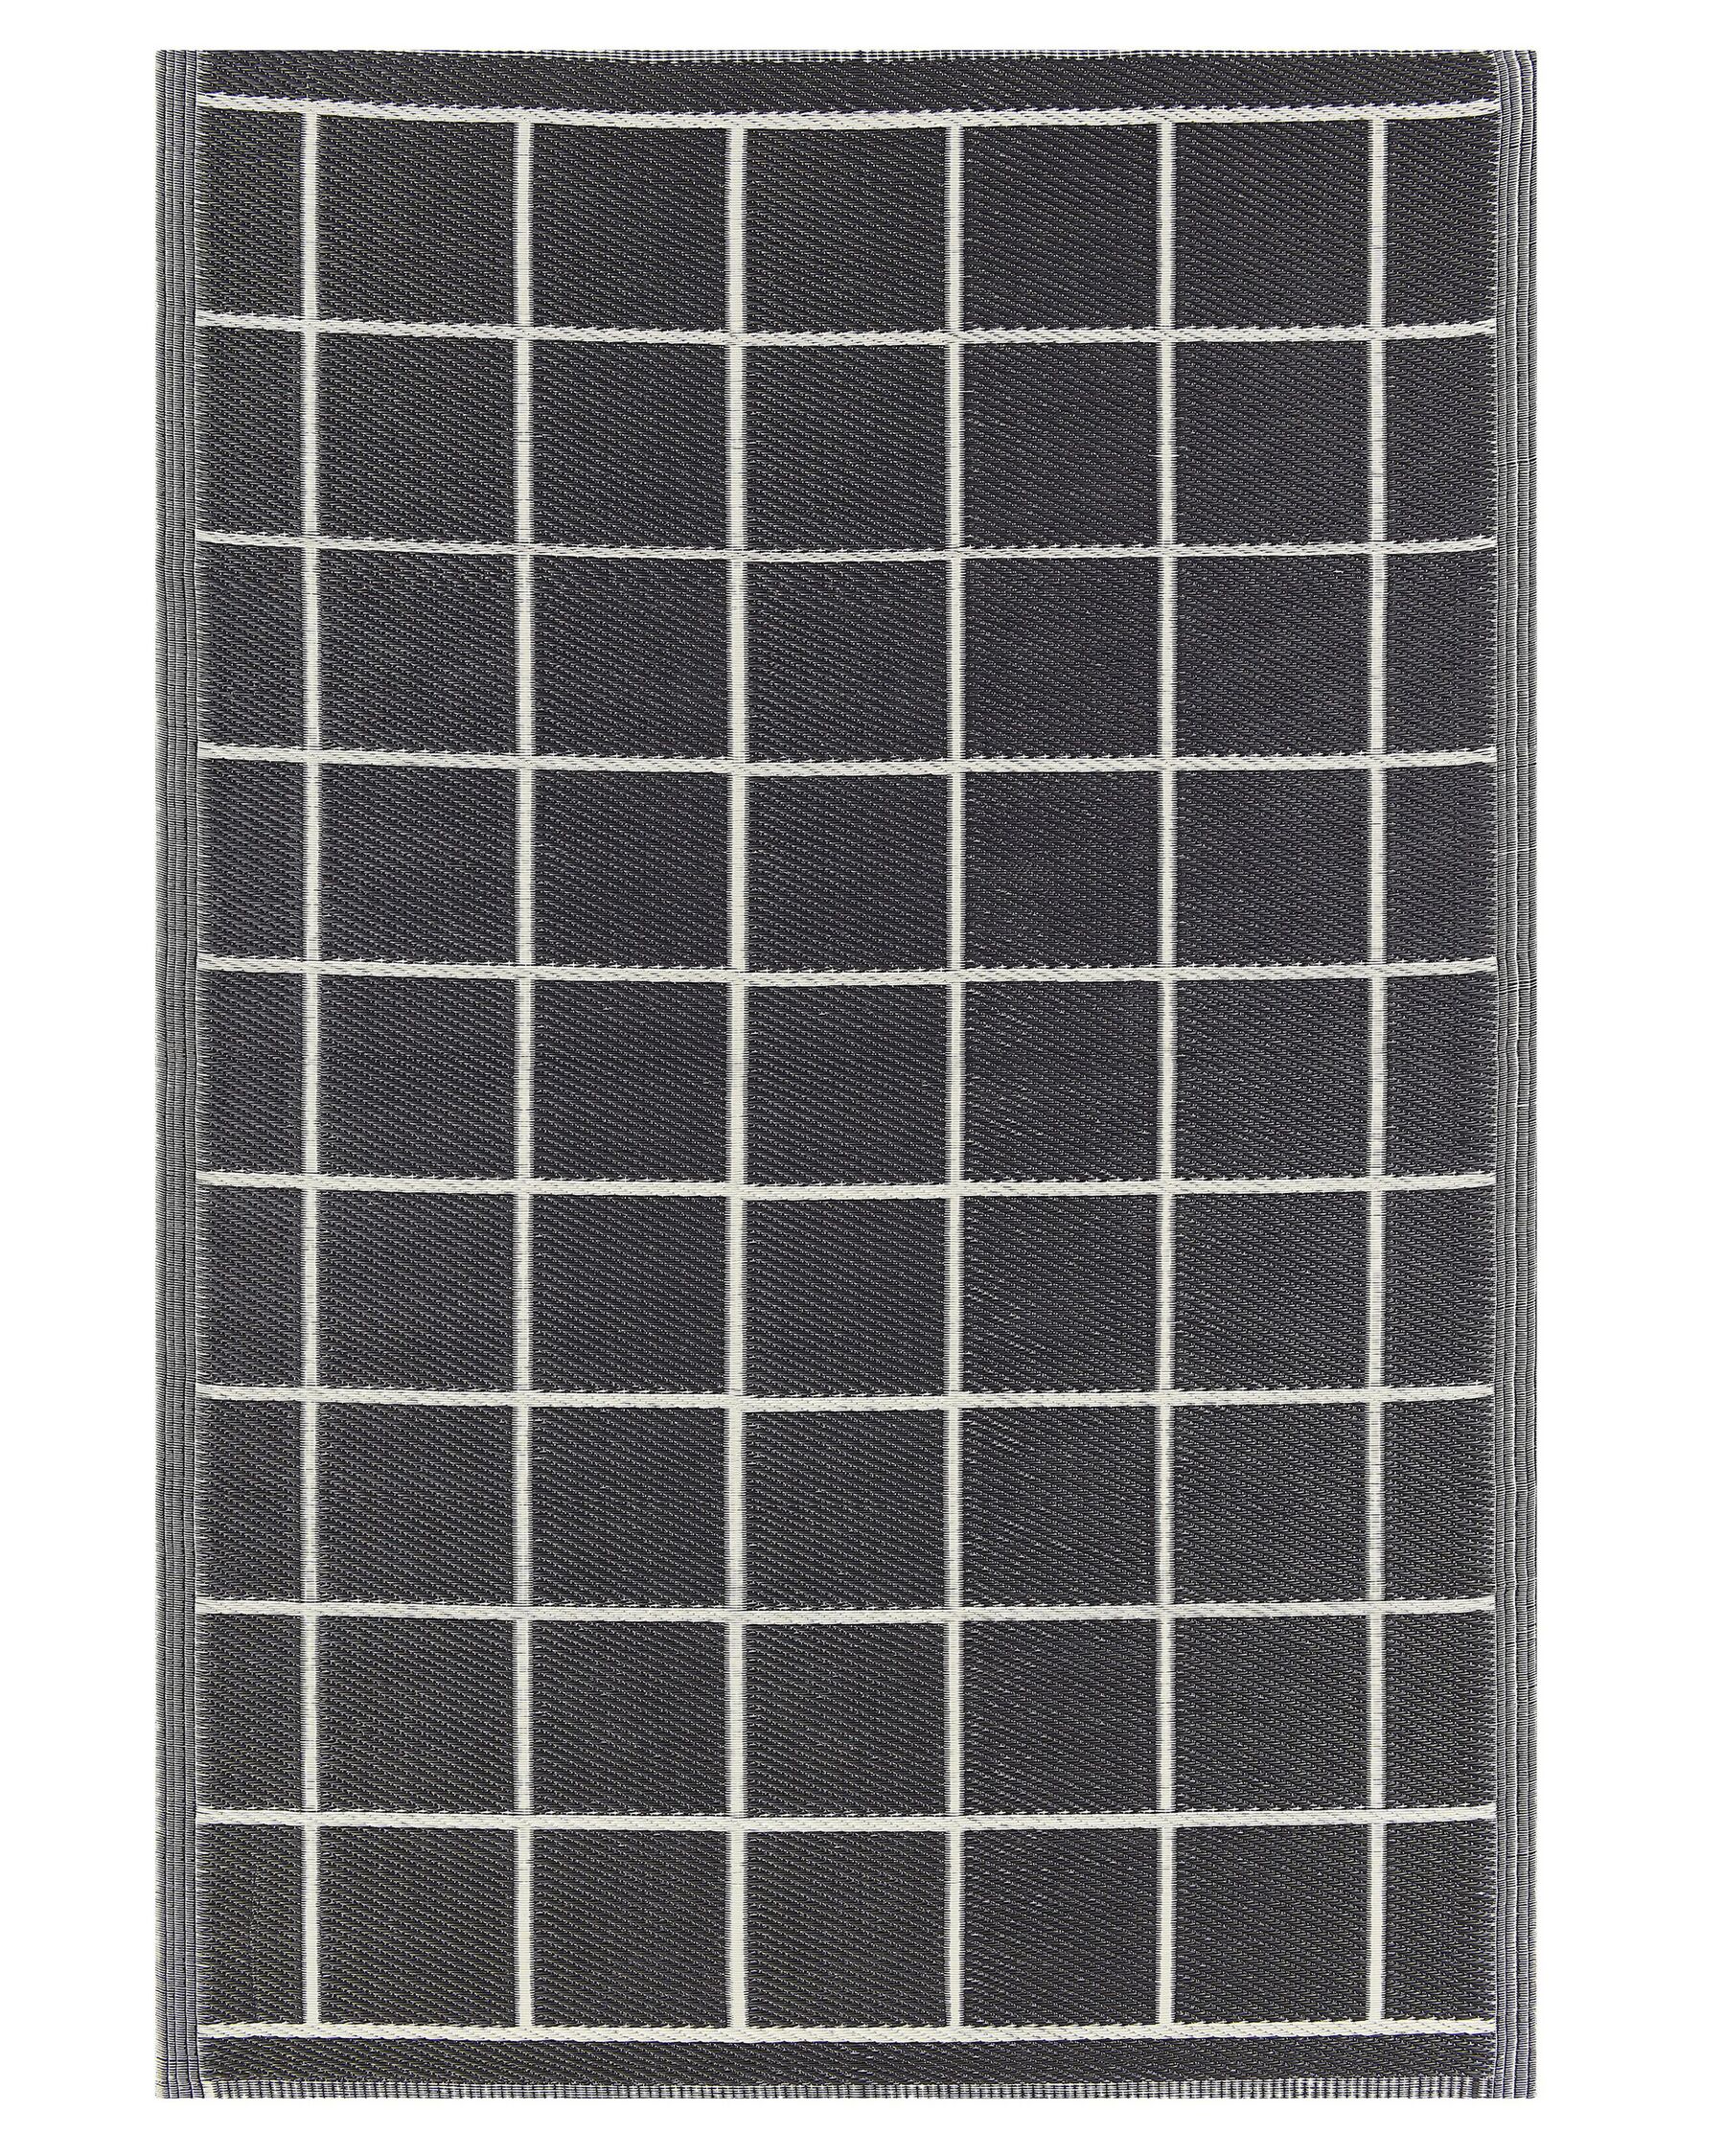 Outdoor Area Rug 120 x 180 cm Black and White RAMPUR_766415